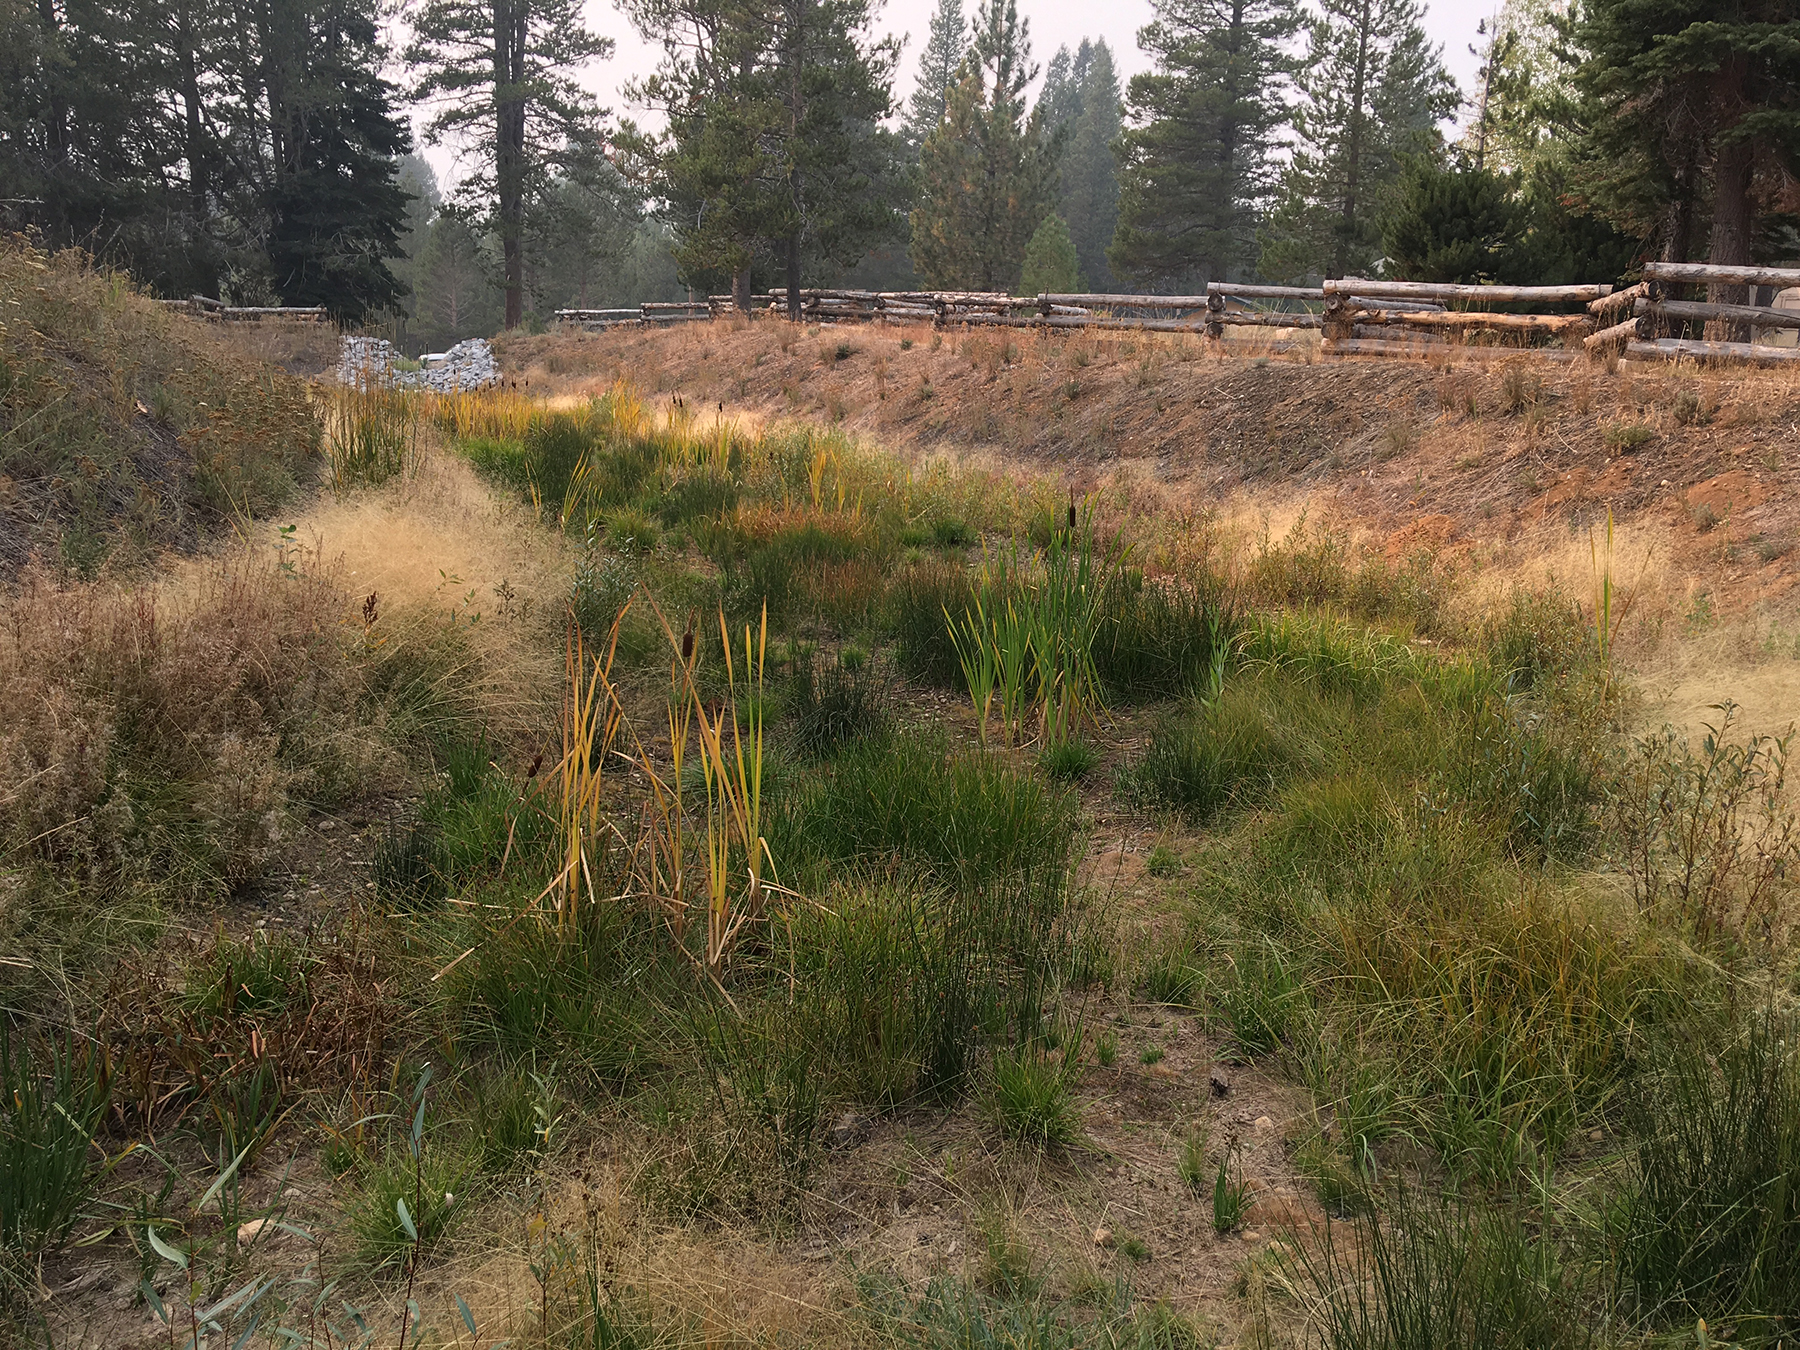 This wetland is used to capture and treat stormwater runoff that otherwise would flow to Lake Tahoe. (Photograph courtesy of El Dorado County, California) 